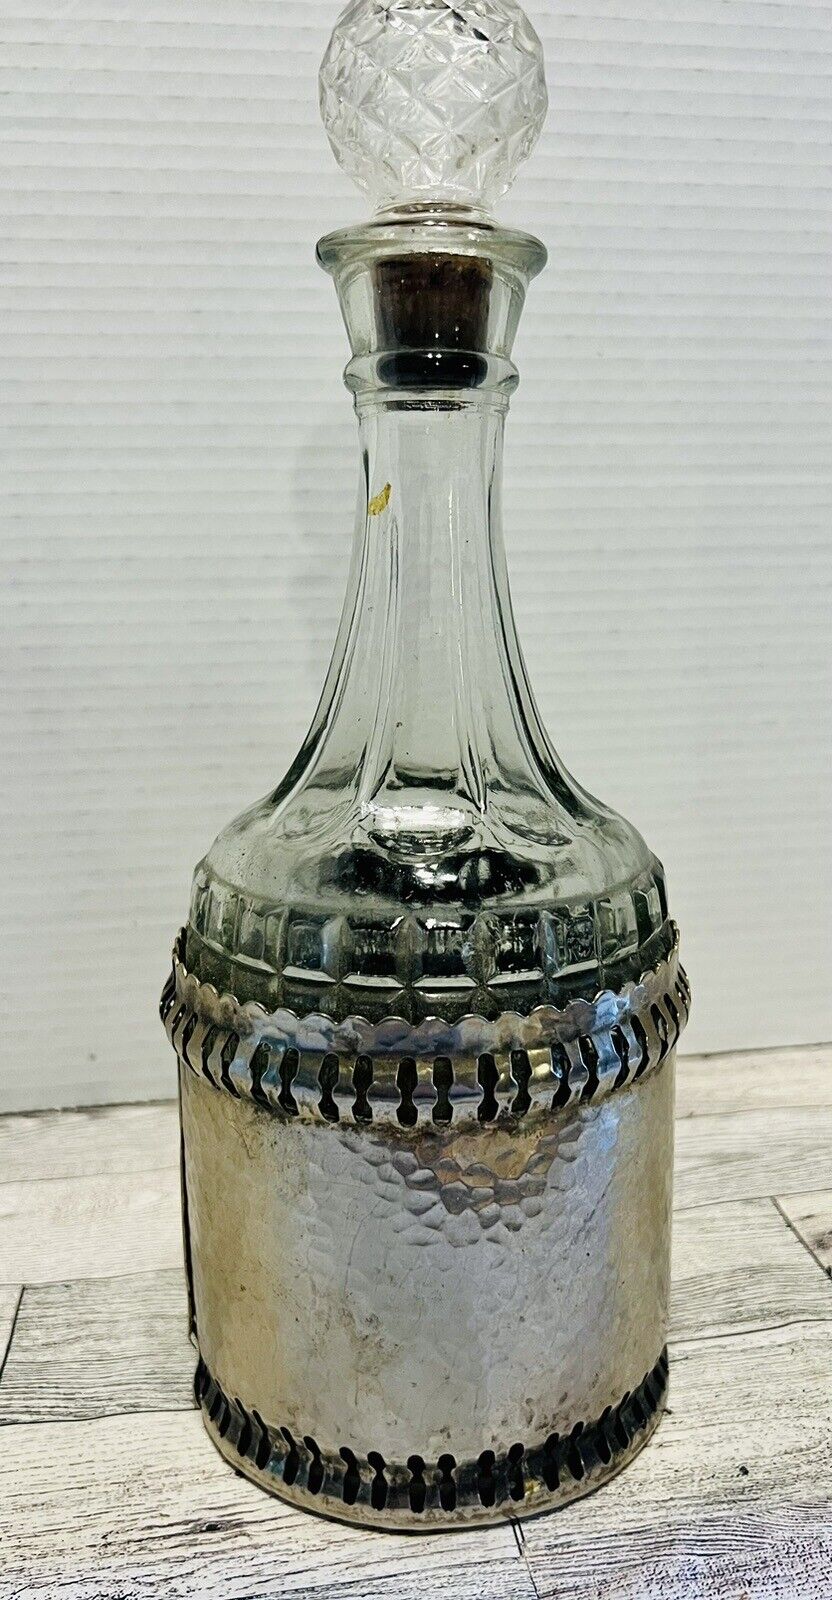 VTG Gales Of Sheffield Hammered Metal Wrap Bottle & Stopper From England 11.5”